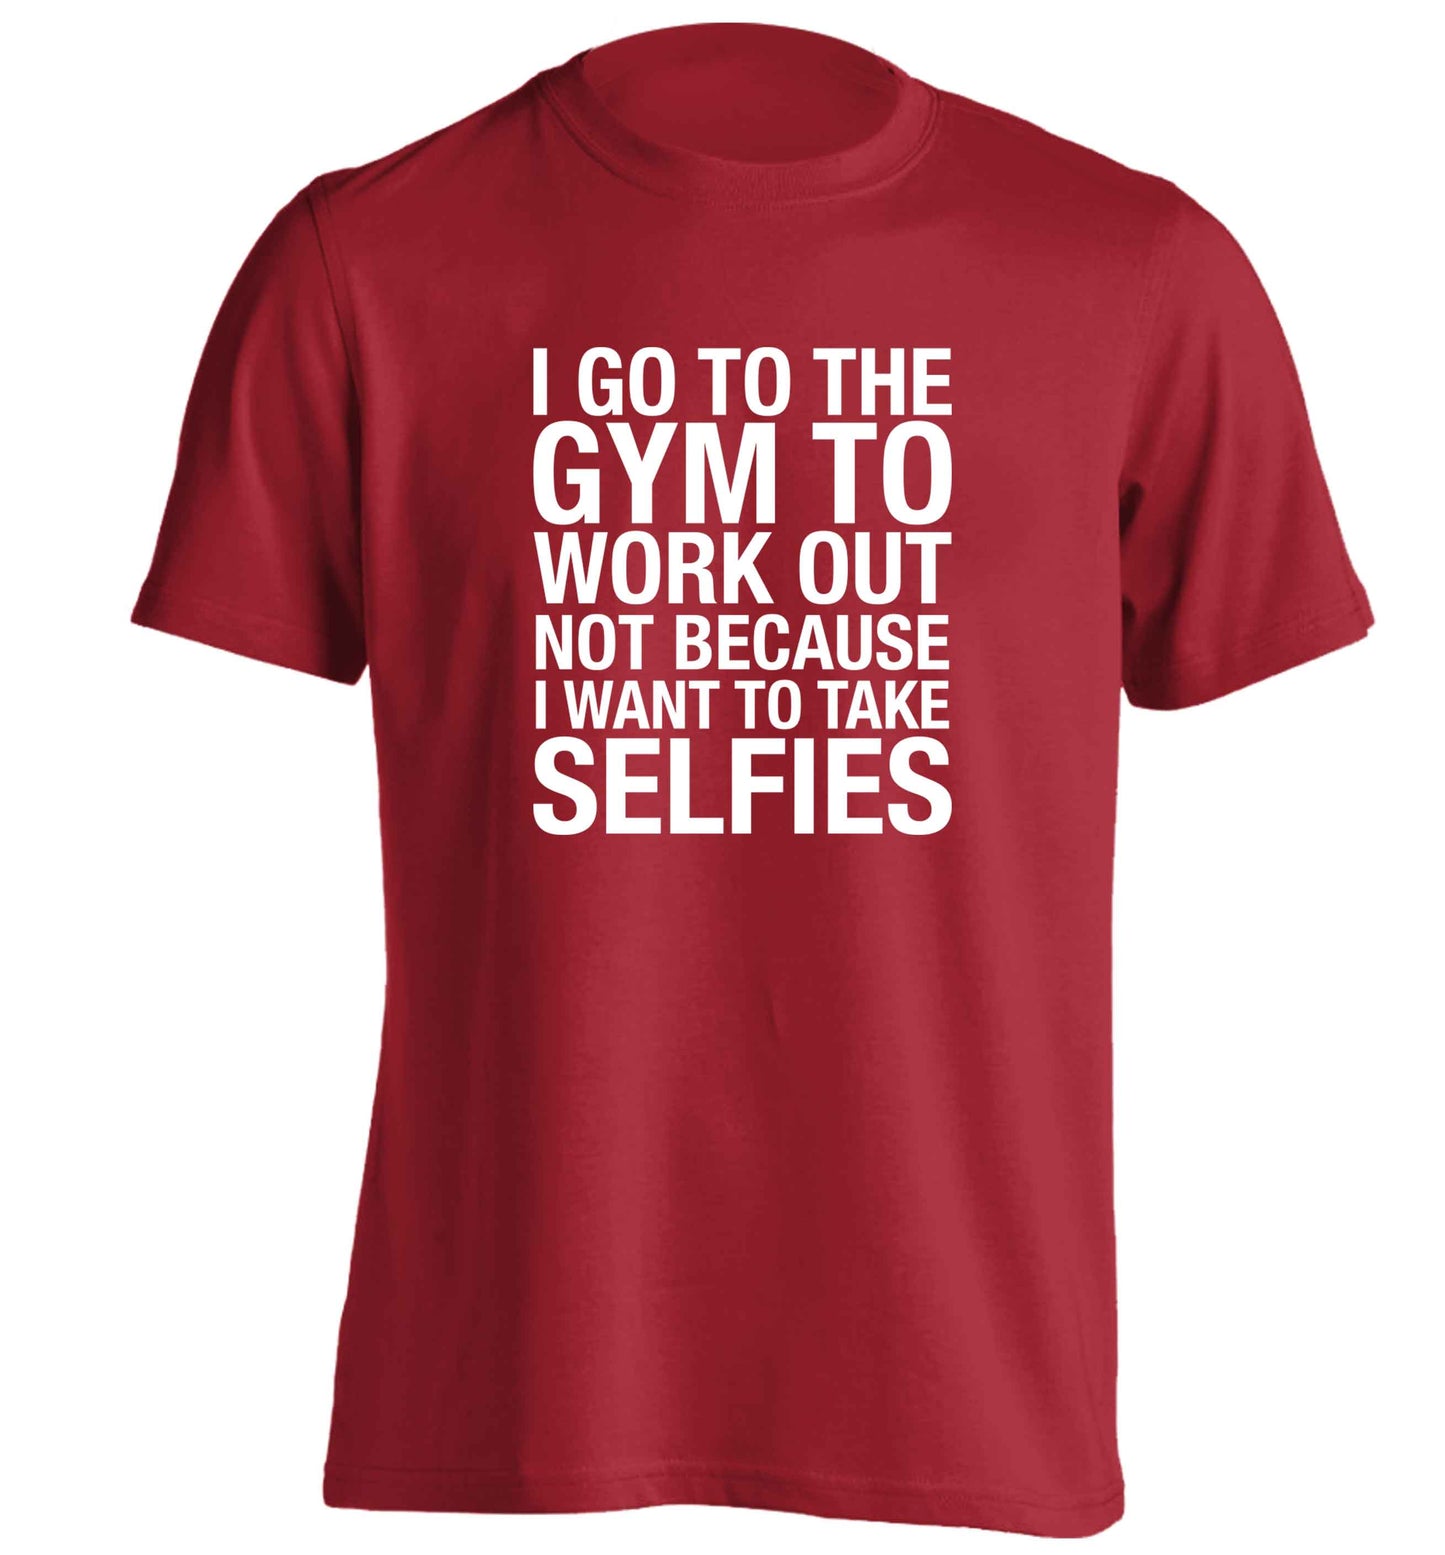 I go to the gym to workout not to take selfies adults unisex red Tshirt 2XL